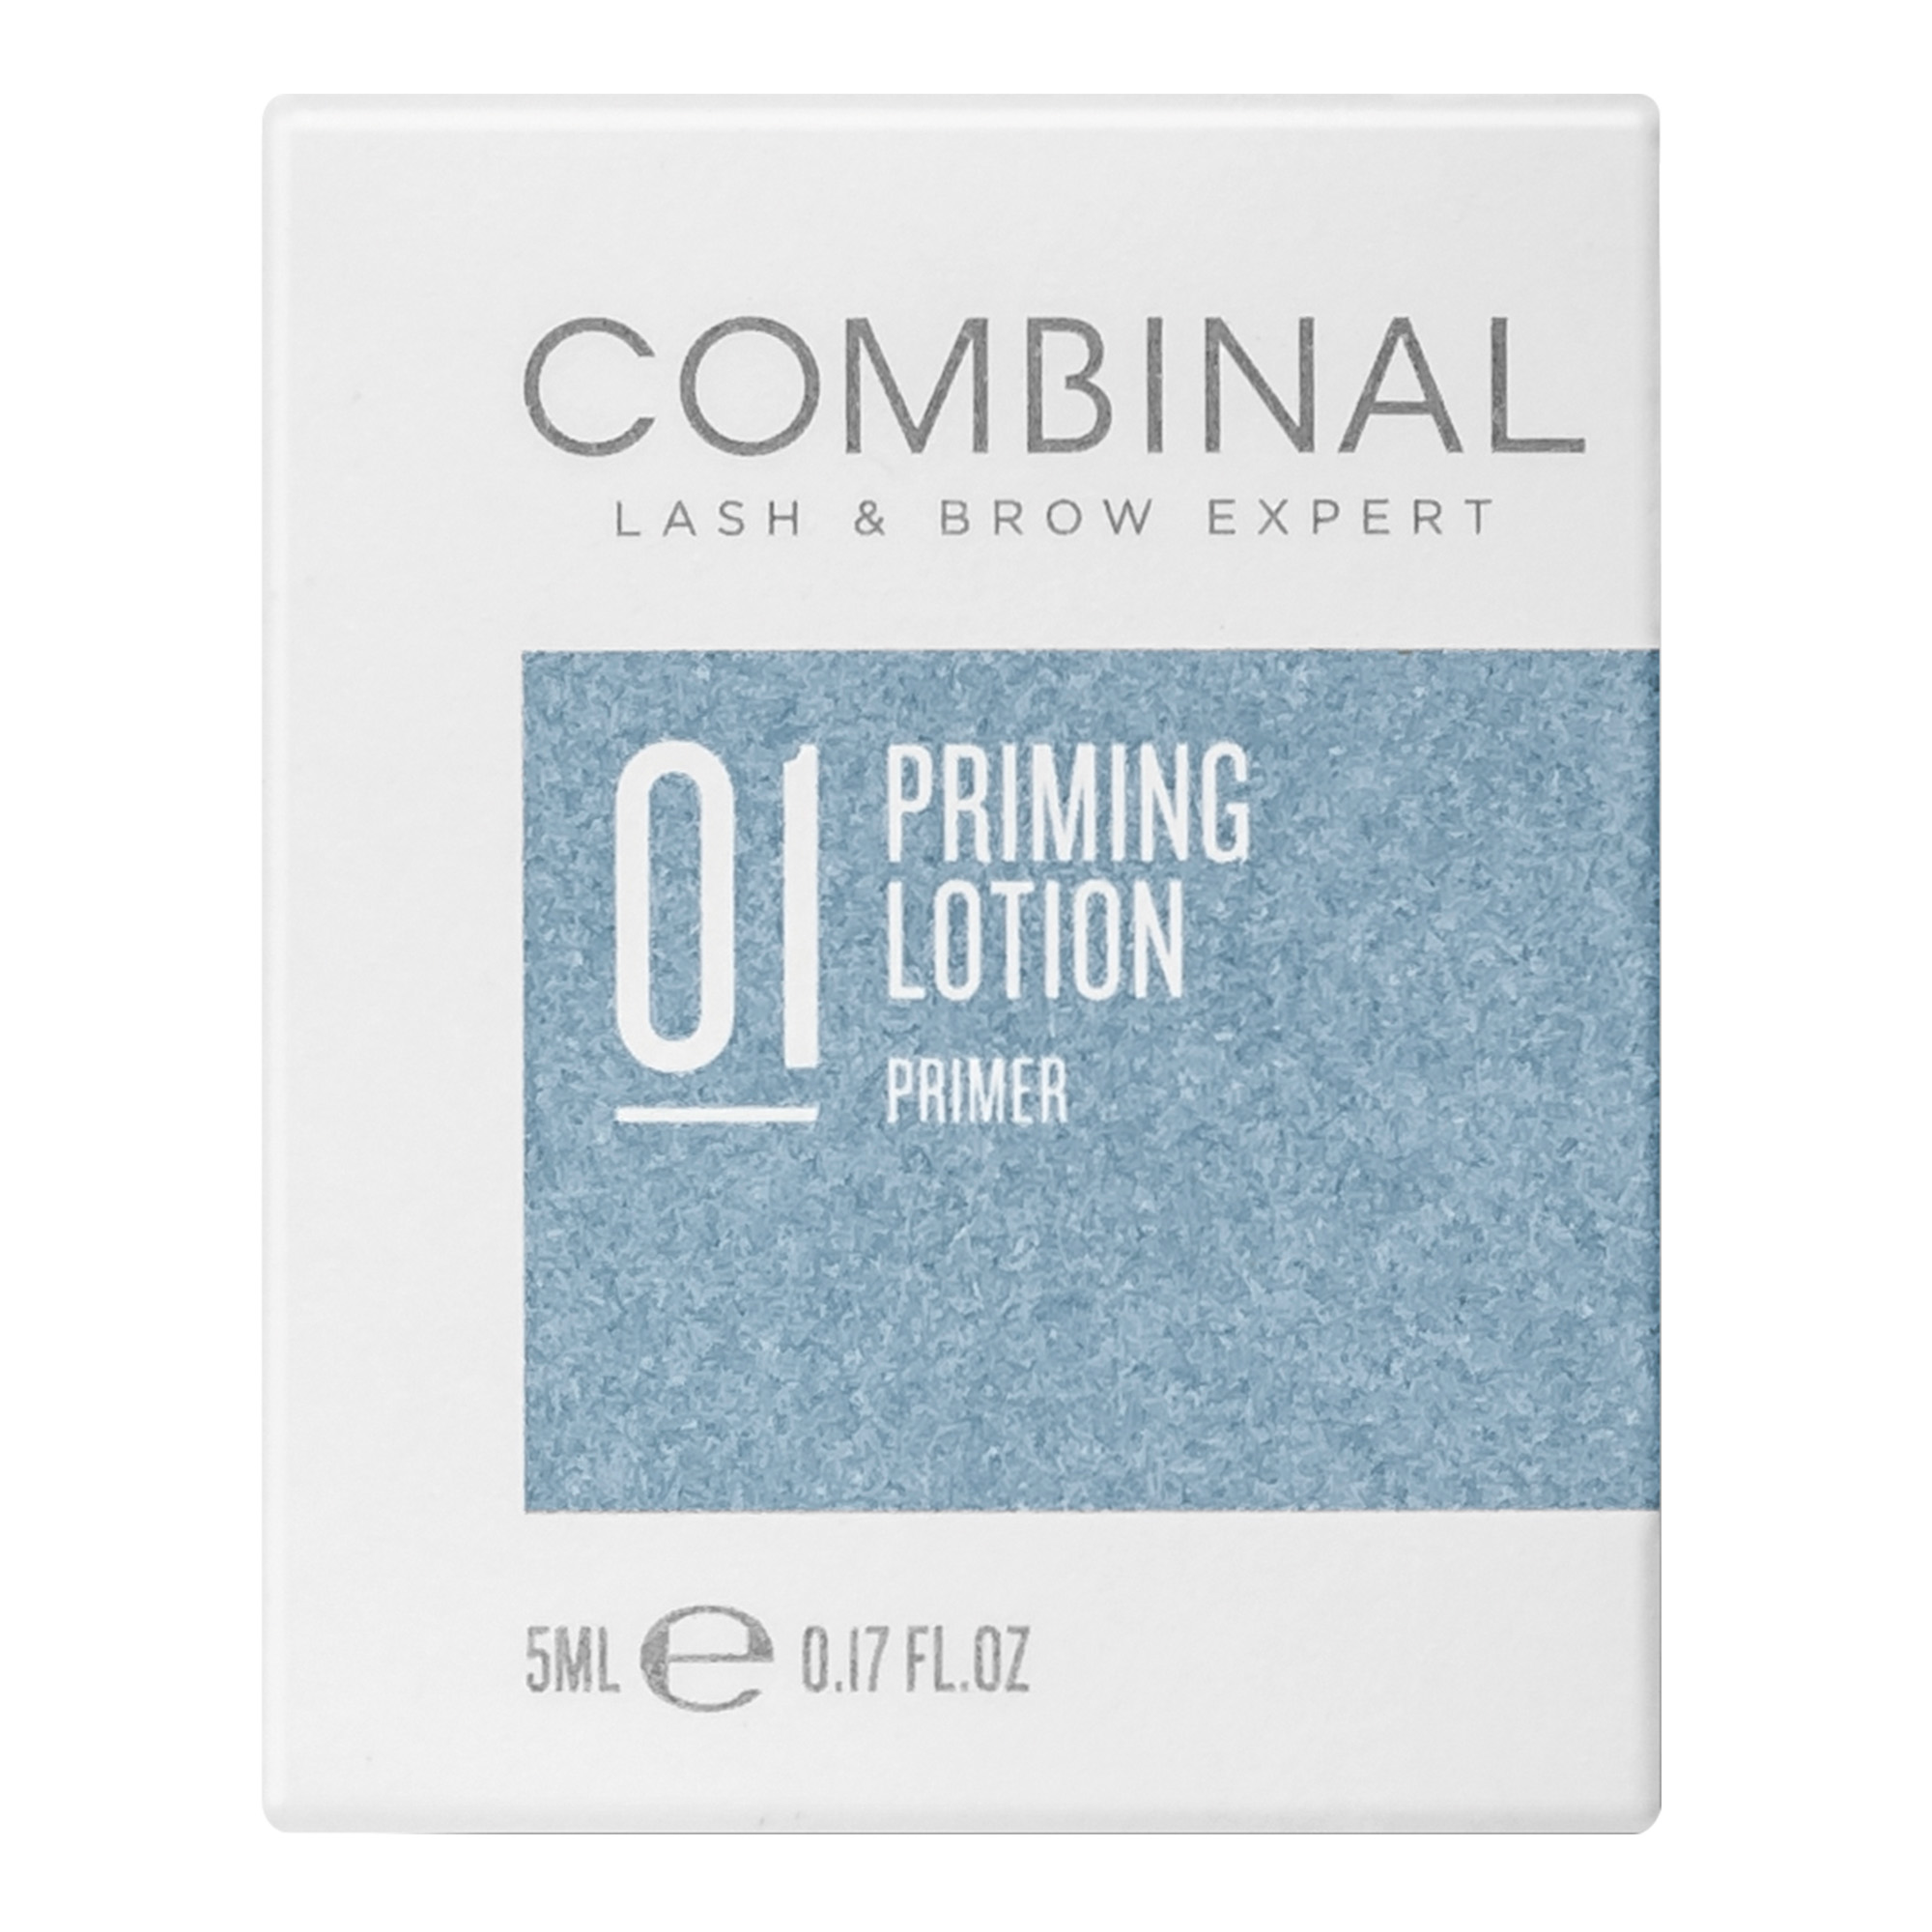 Wimpernlifting Priming Lotion 5 ml